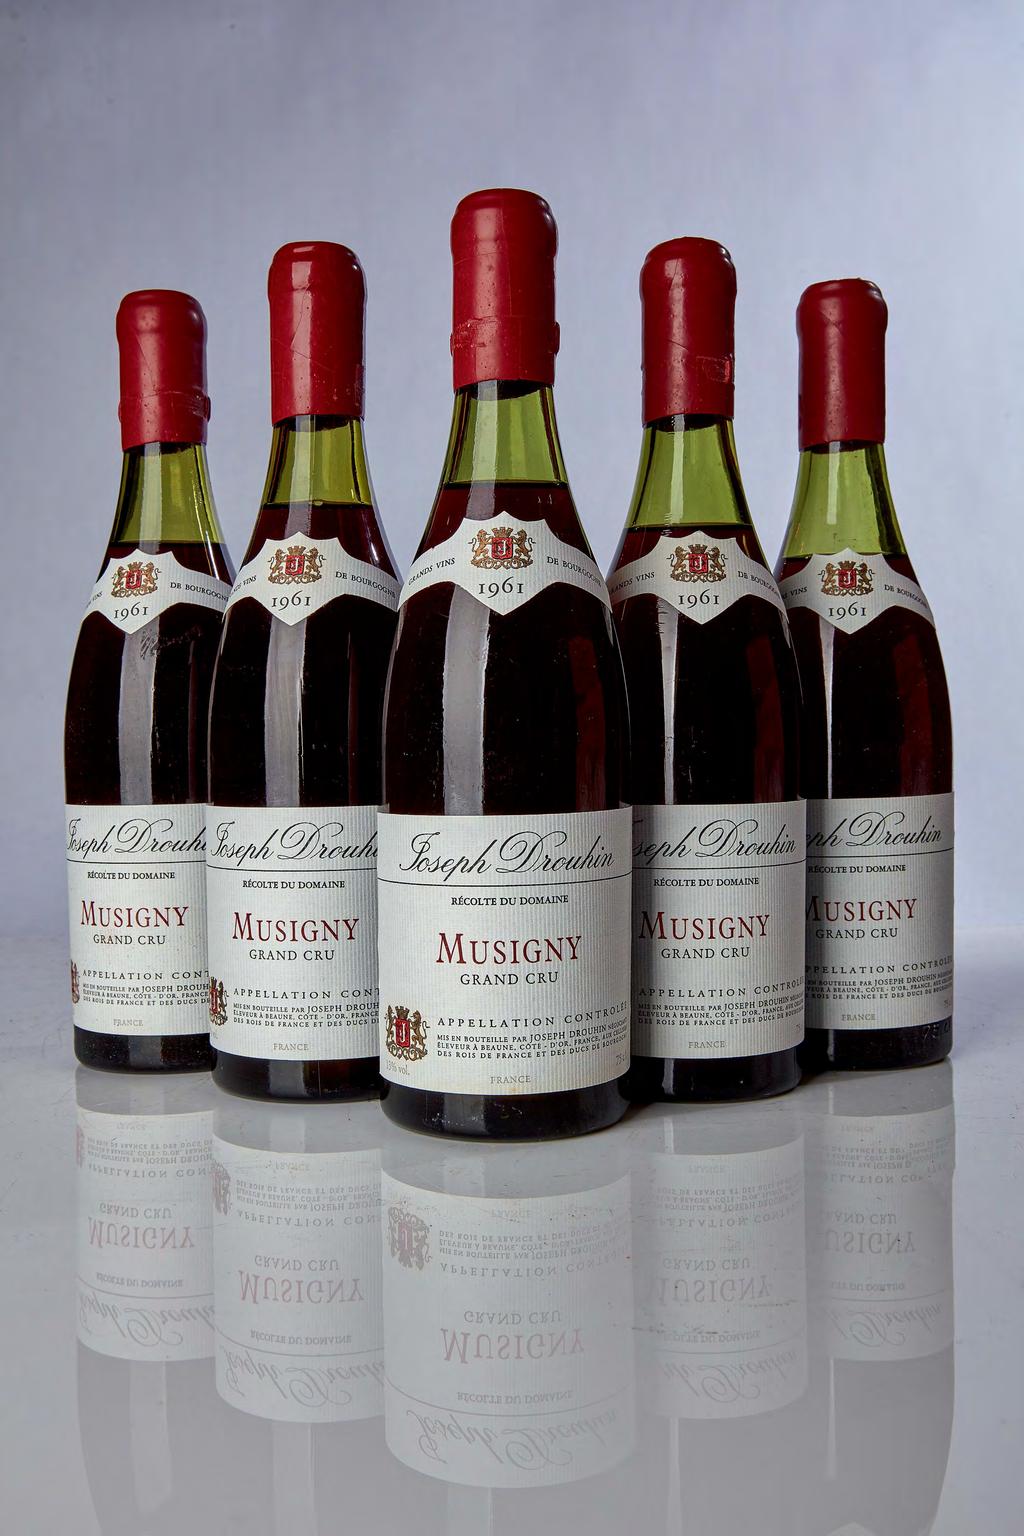 MUSIGNY One of the most prestigious Grands Crus of Burgundy, famous for its fruitiness and complexity.